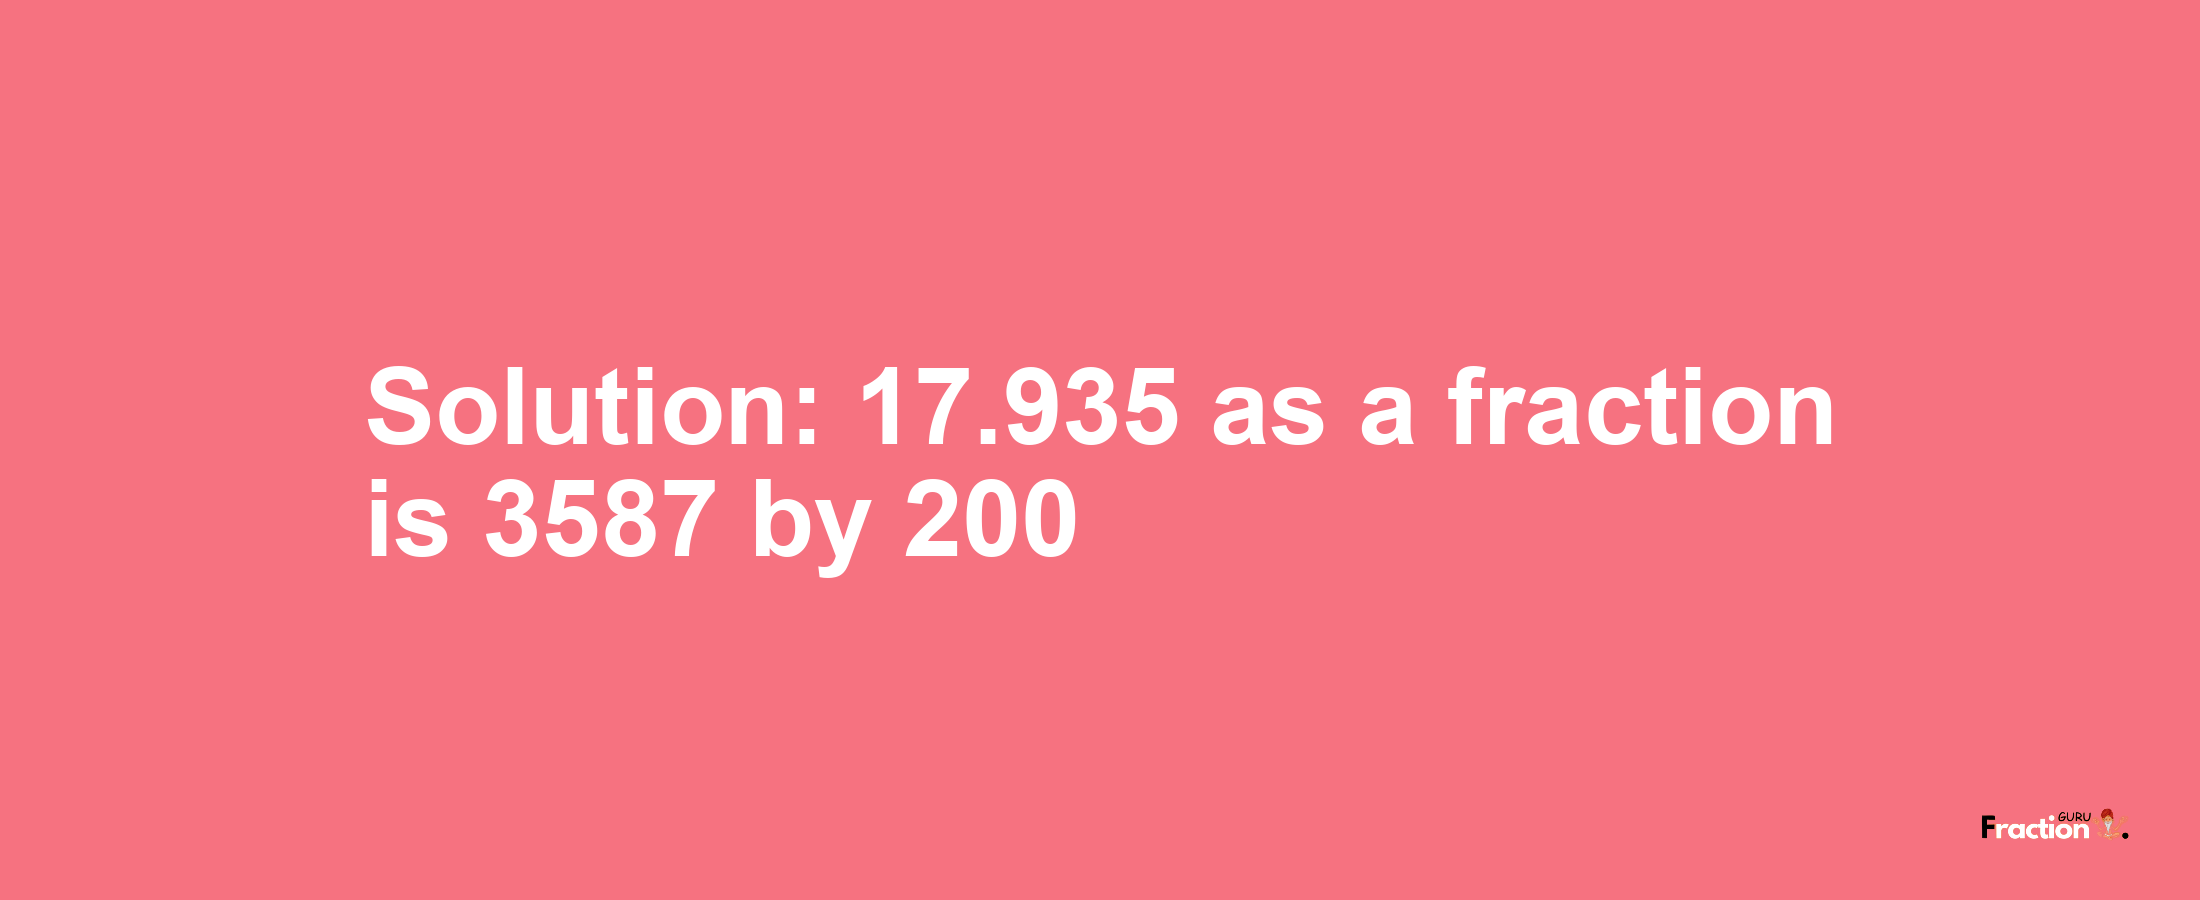 Solution:17.935 as a fraction is 3587/200